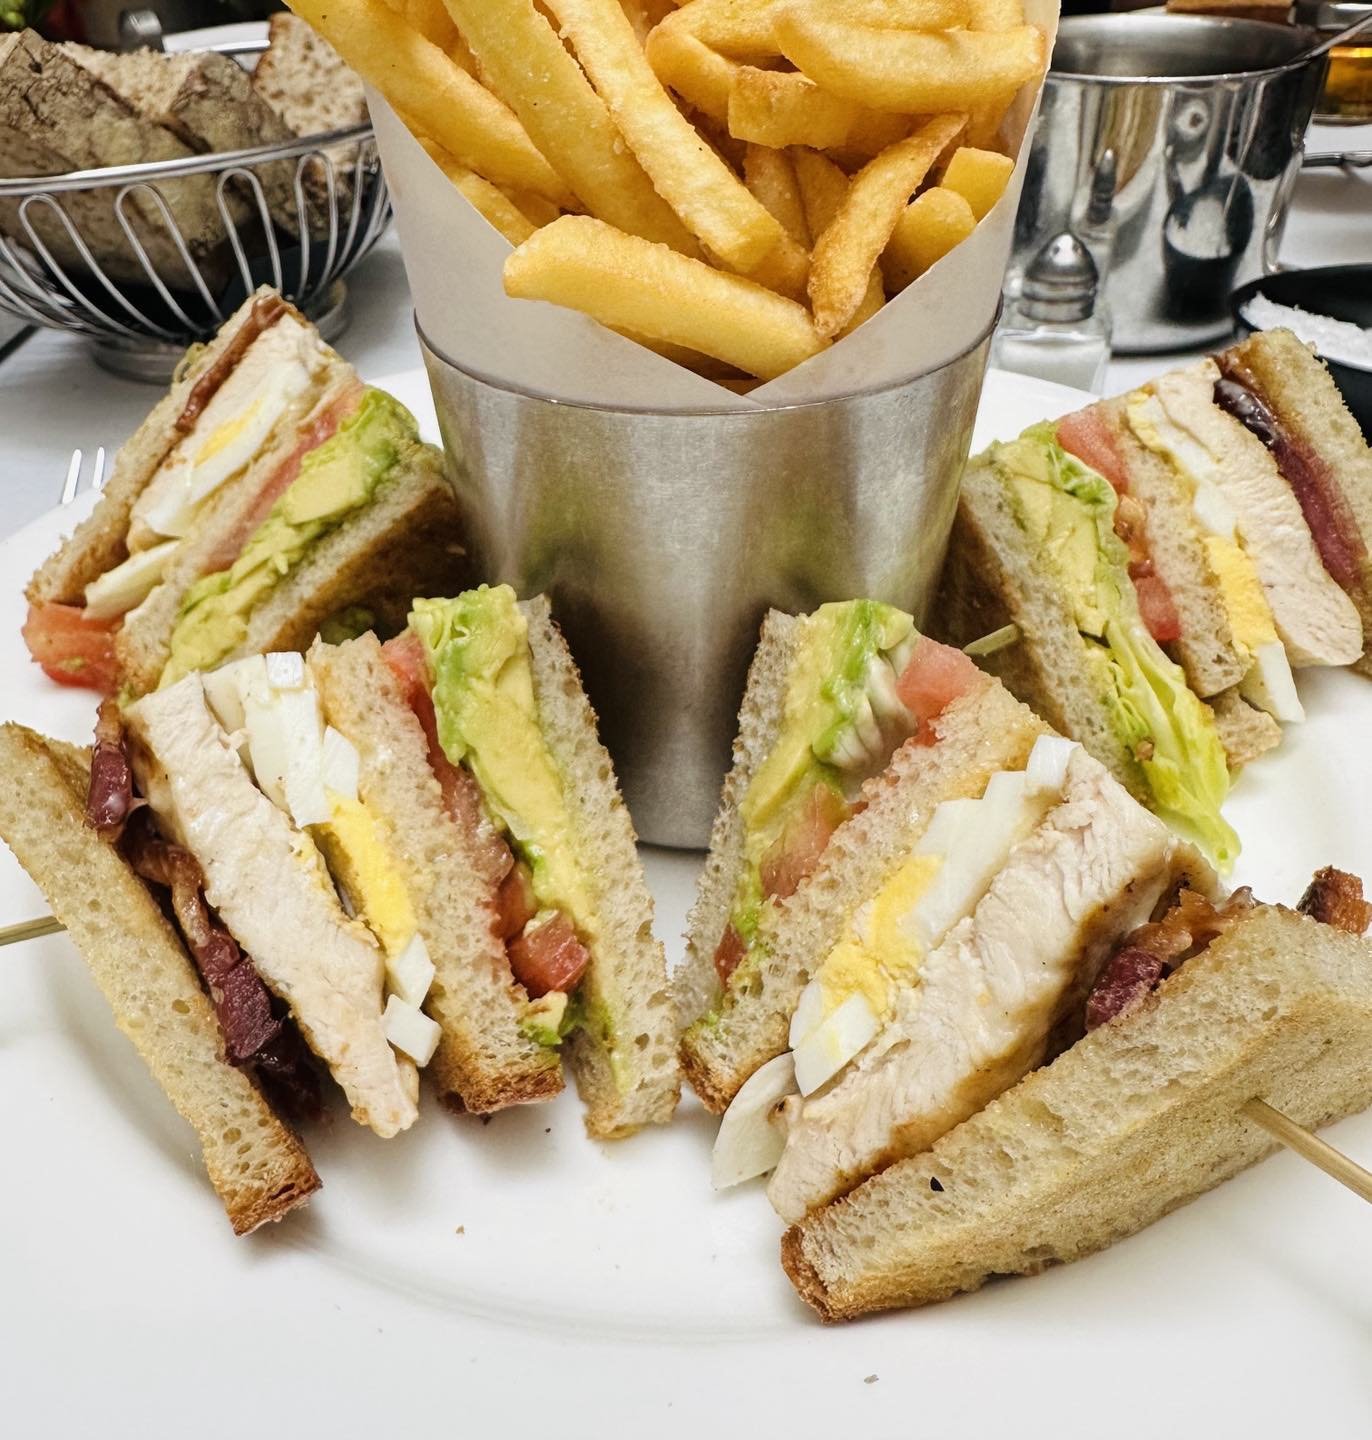 Diane&rsquo;s favorite lunch - a traditional roast turkey club sandwich with avocado and bacon.  It&rsquo;s the inspiration for our new club sandwich hors d&rsquo;&oelig;uvre.